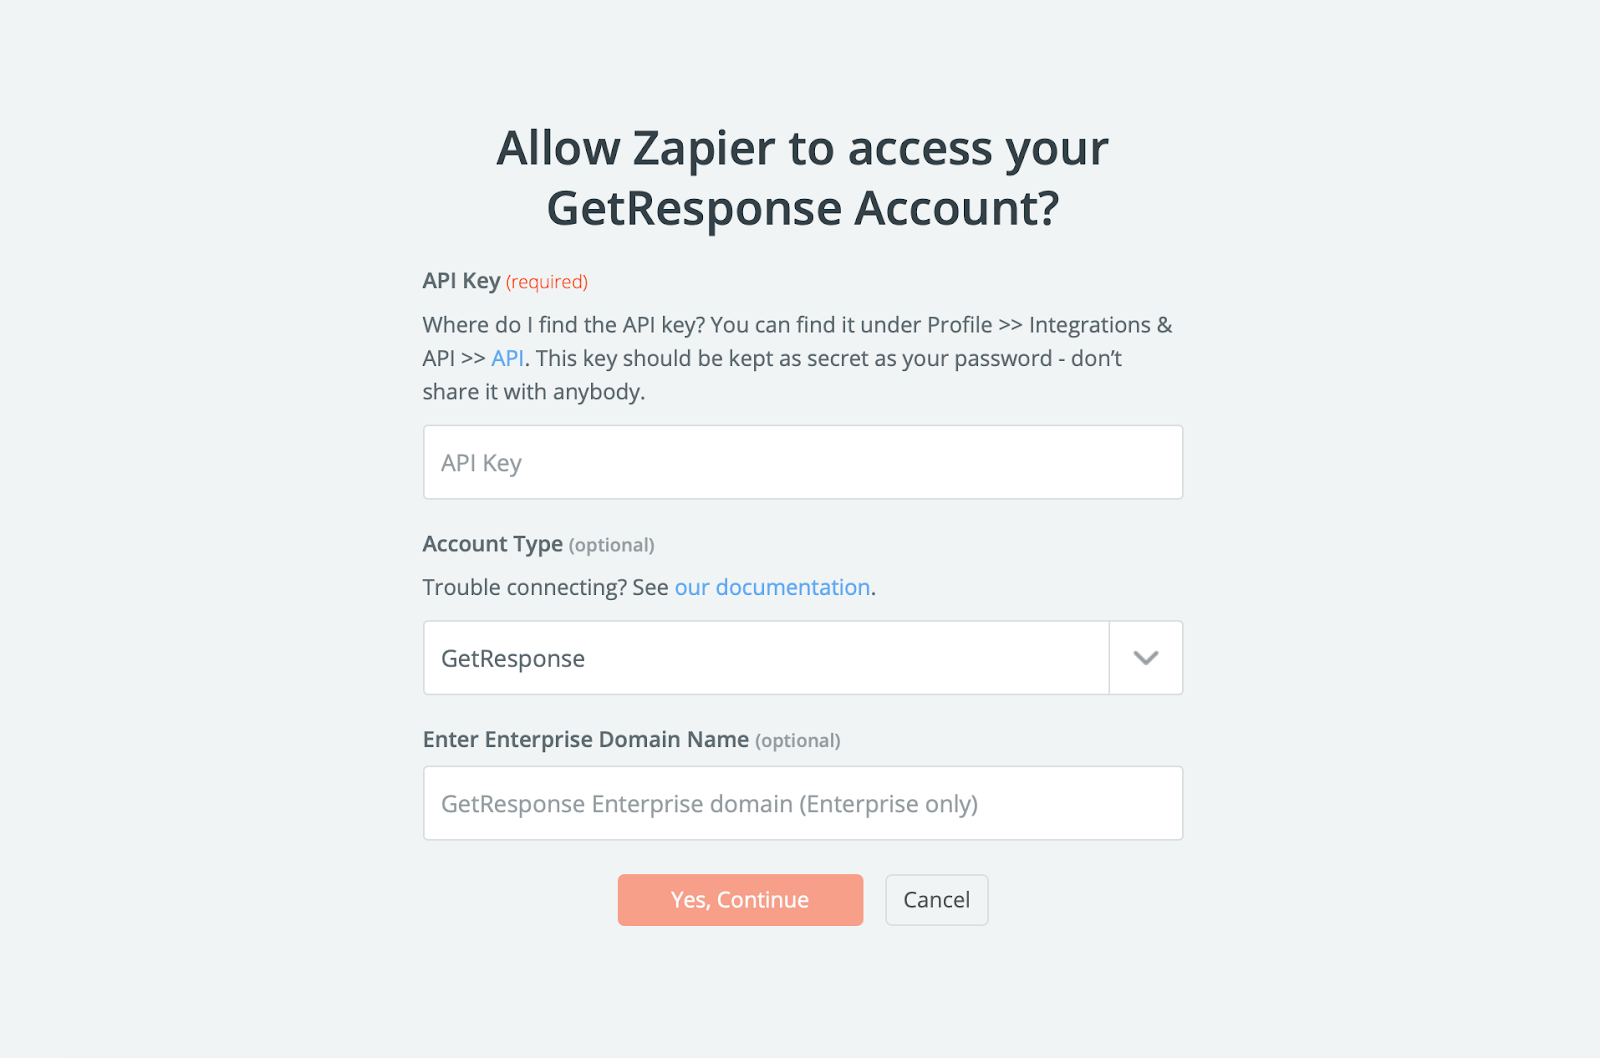 To connect Zapier with GetResponse you need the API Key.